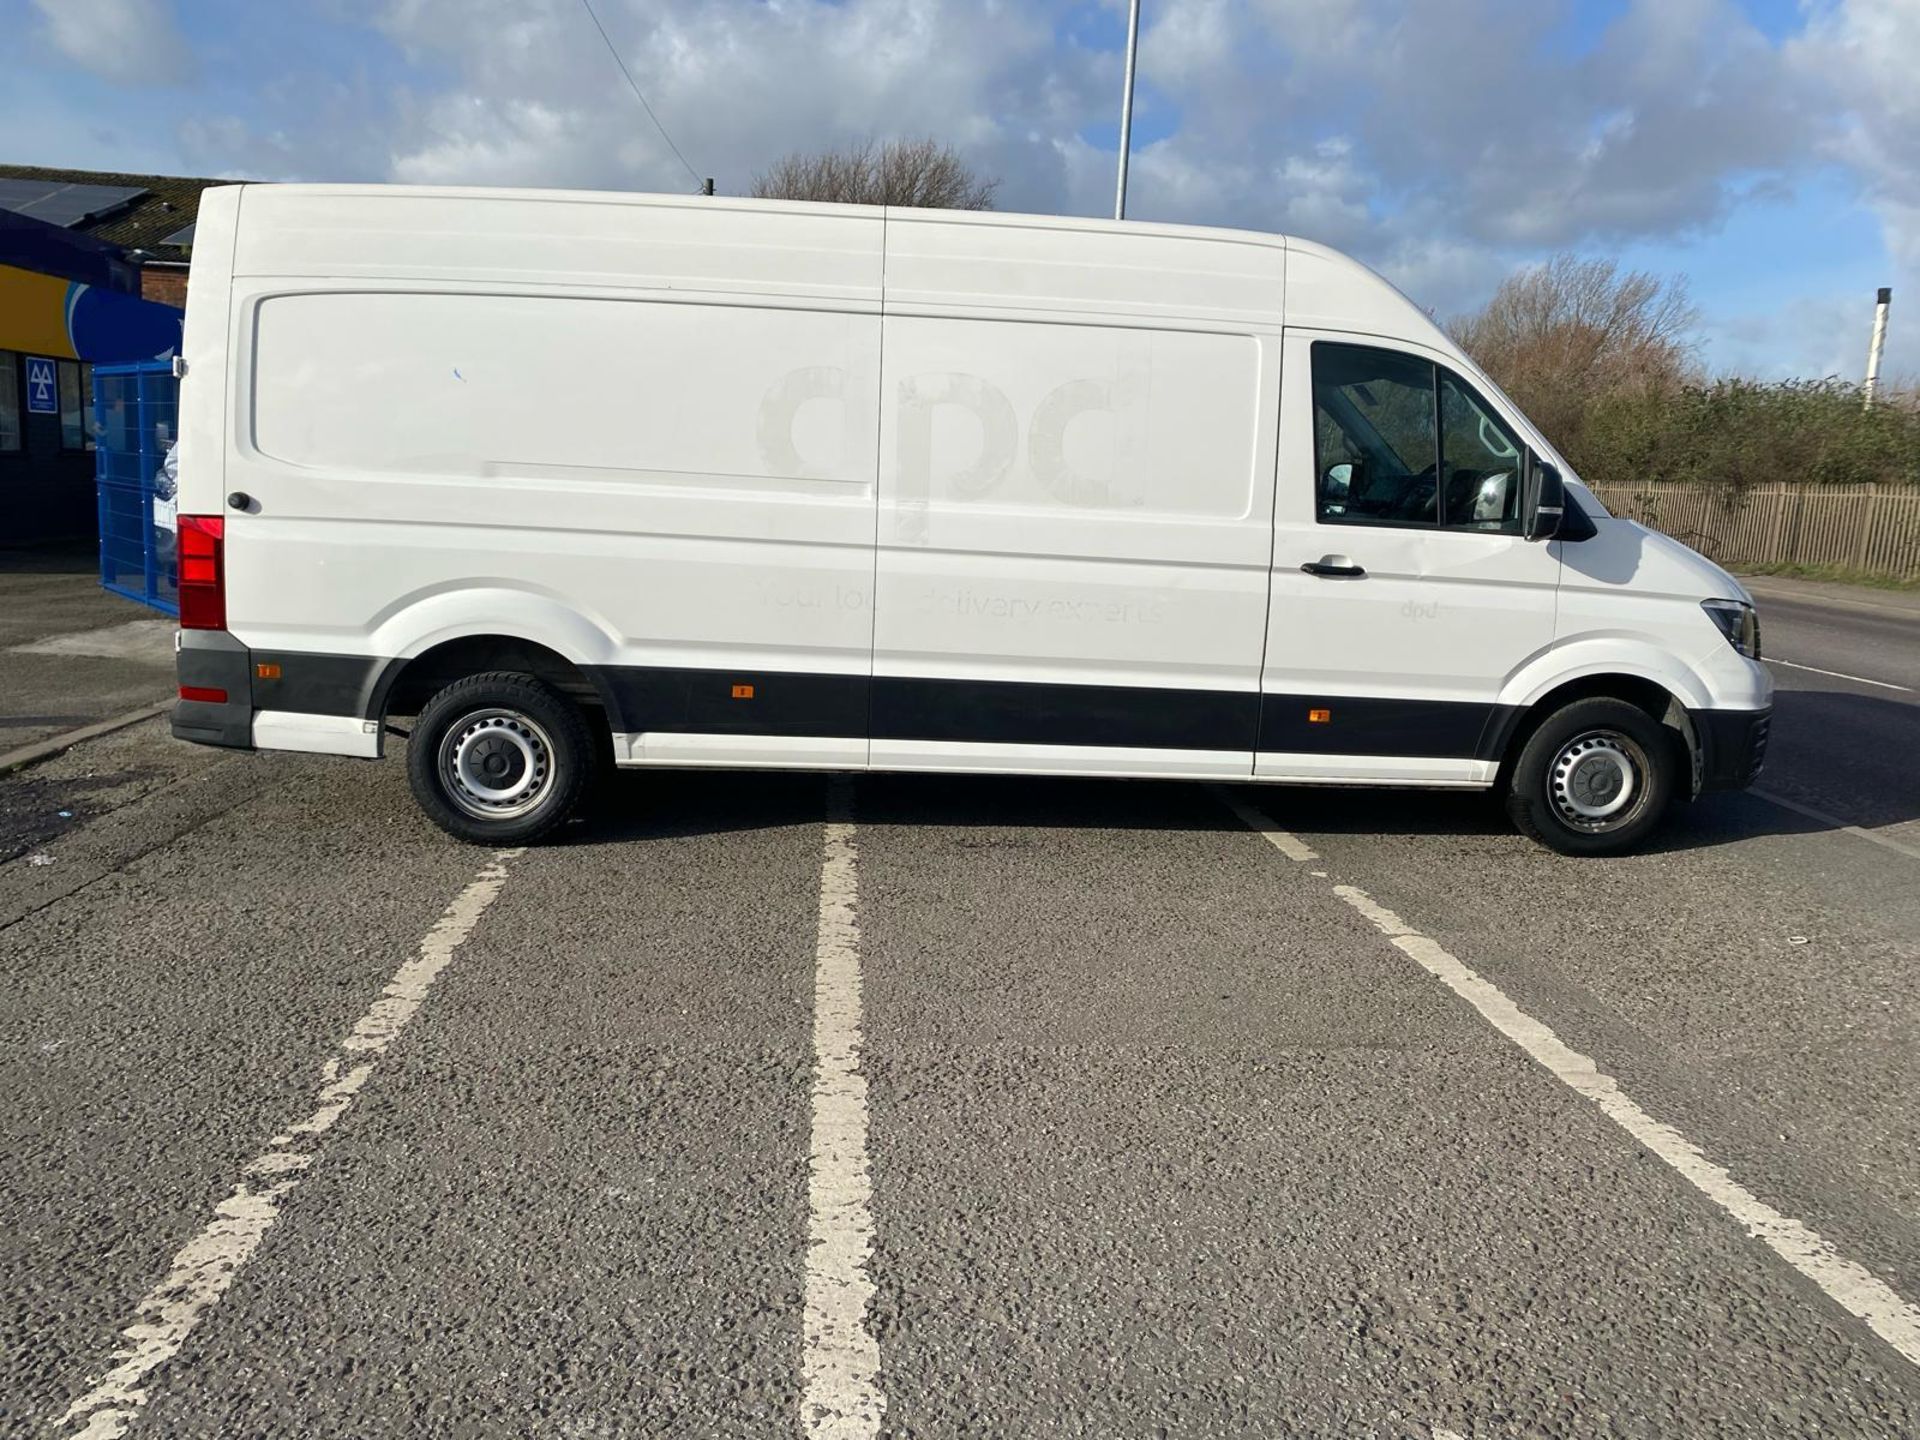 2019 69 VOLKSWAGEN CRAFTER LWB HIGH ROOF PANEL VAN - 87K MILES - PLY LINED. - Image 11 of 12